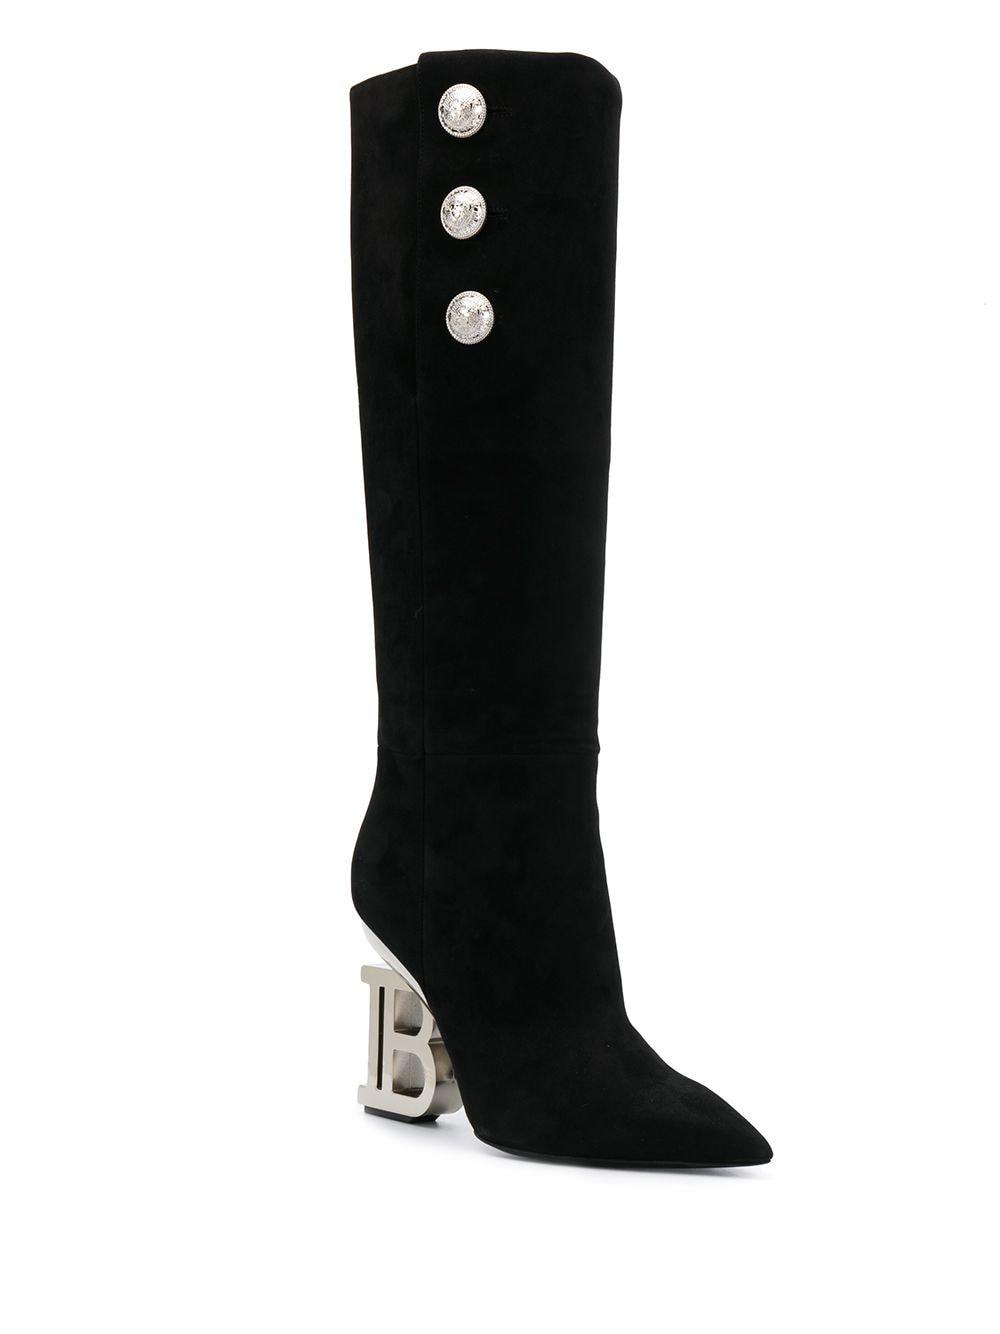 Balmain Nelly Over-the-knee Boots in Black - Lyst